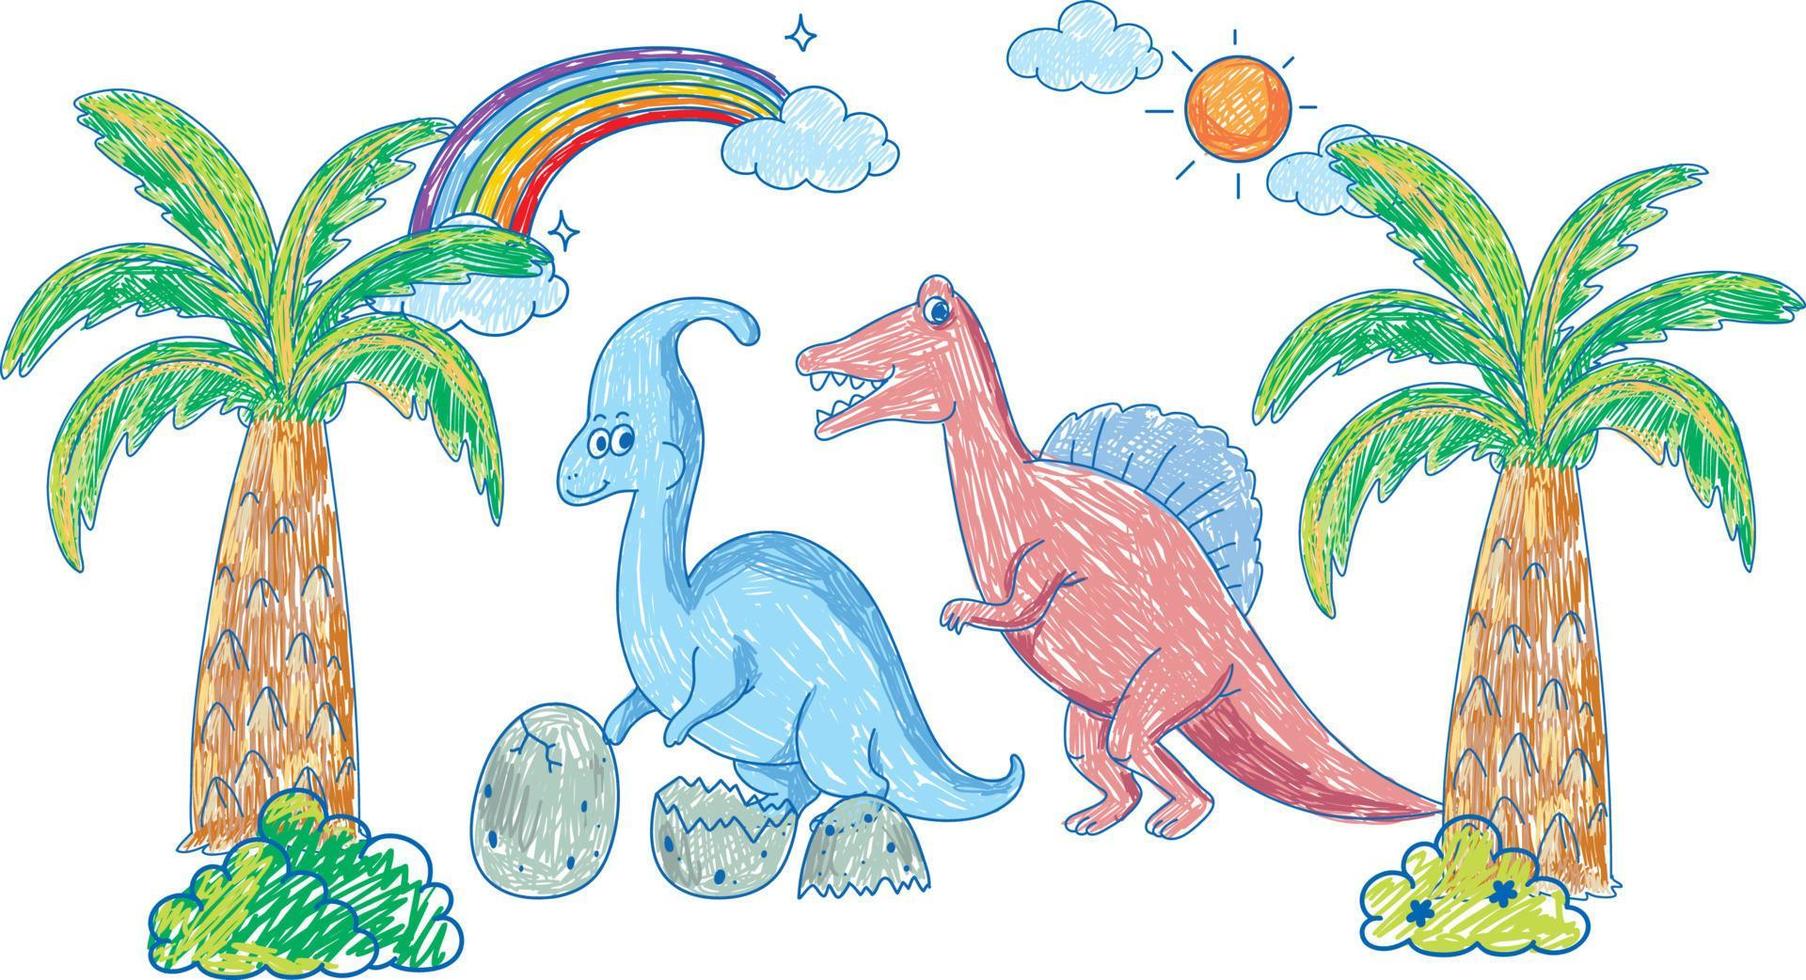 Coloured hand drawn dinosaurs group vector